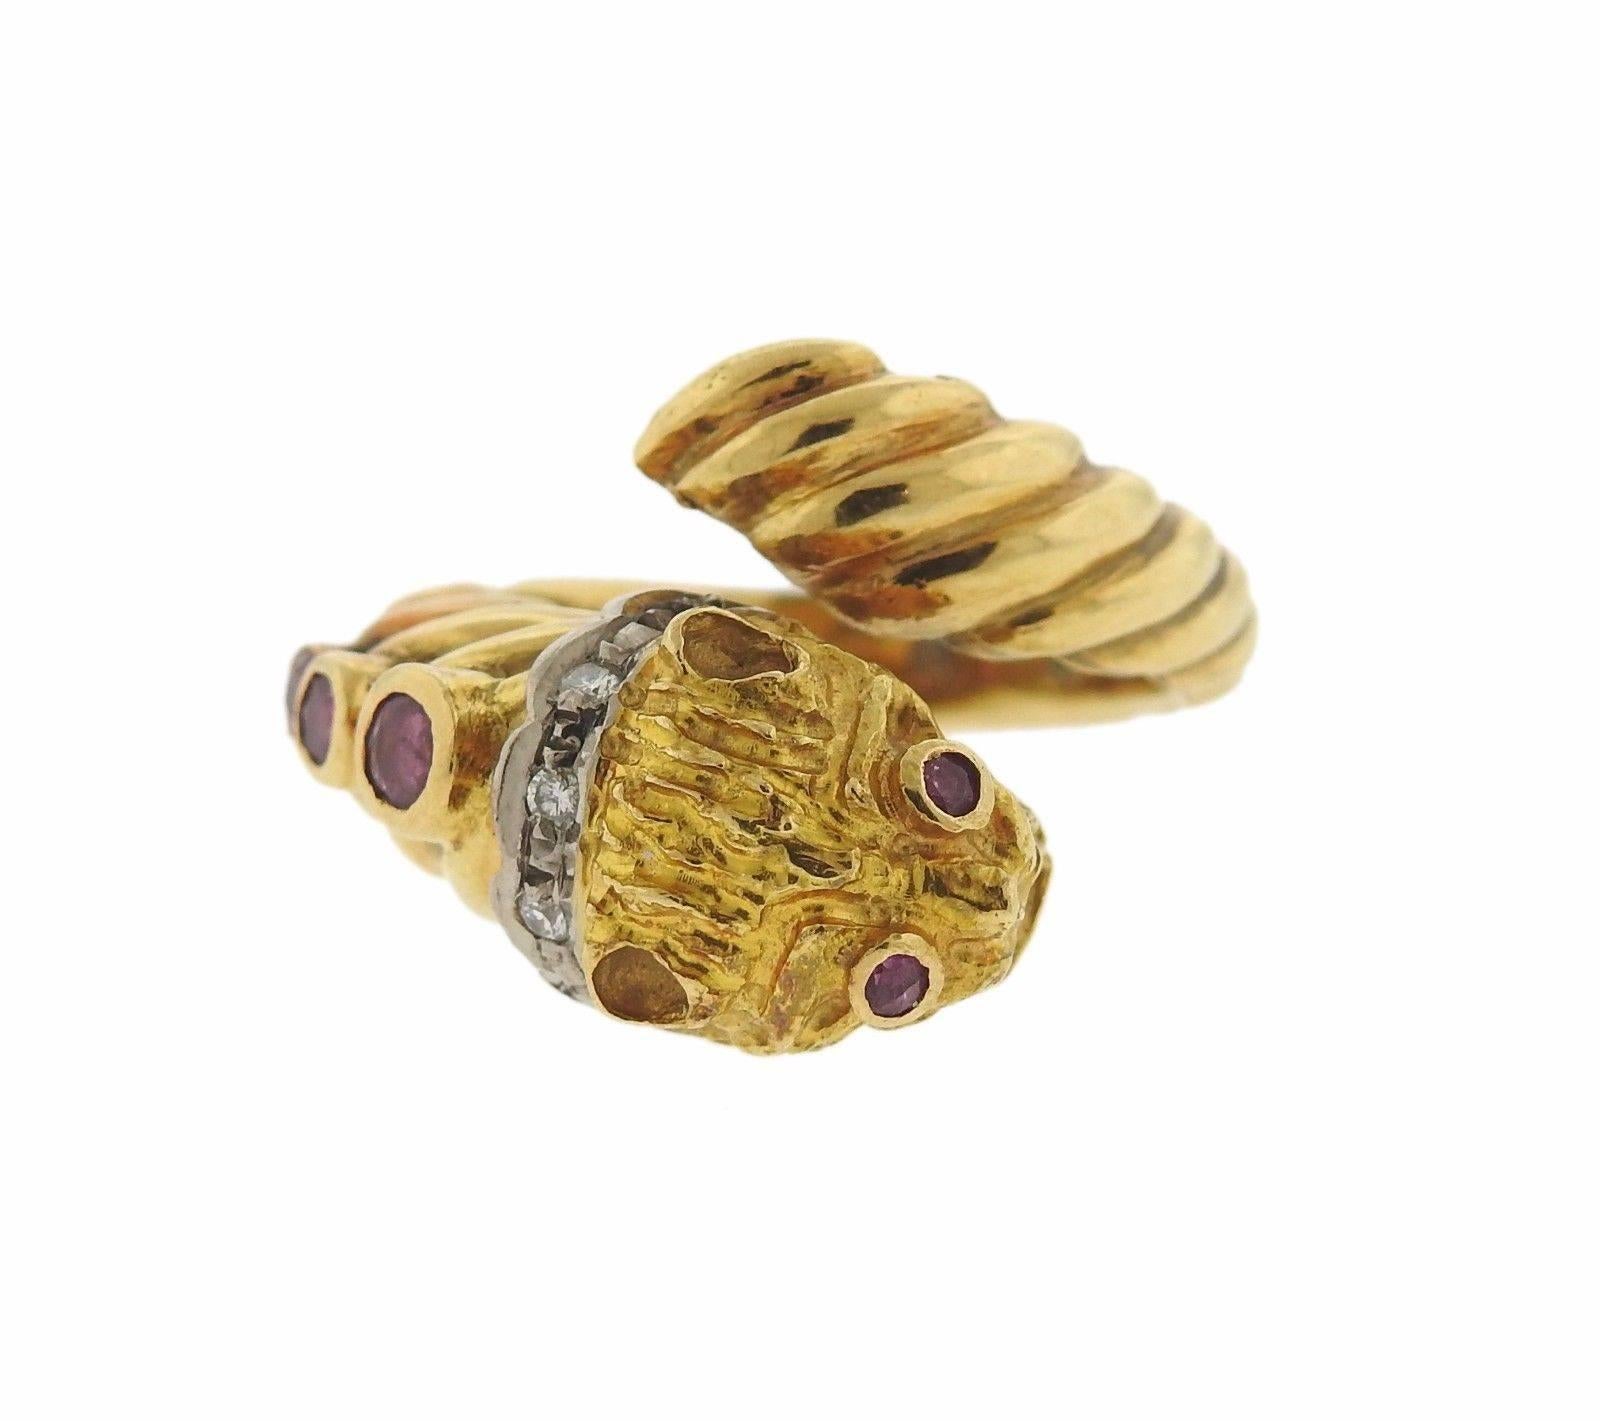 An 18k yellow gold ring set with rubies and approximately 0.05ctw of H/SI diamonds.  The ring is a size 6.75, ring top measures approx. 17mm wide.  The weight of the ring is 9.7 grams. Marked: Maker's mark, A21, 750, Greece.